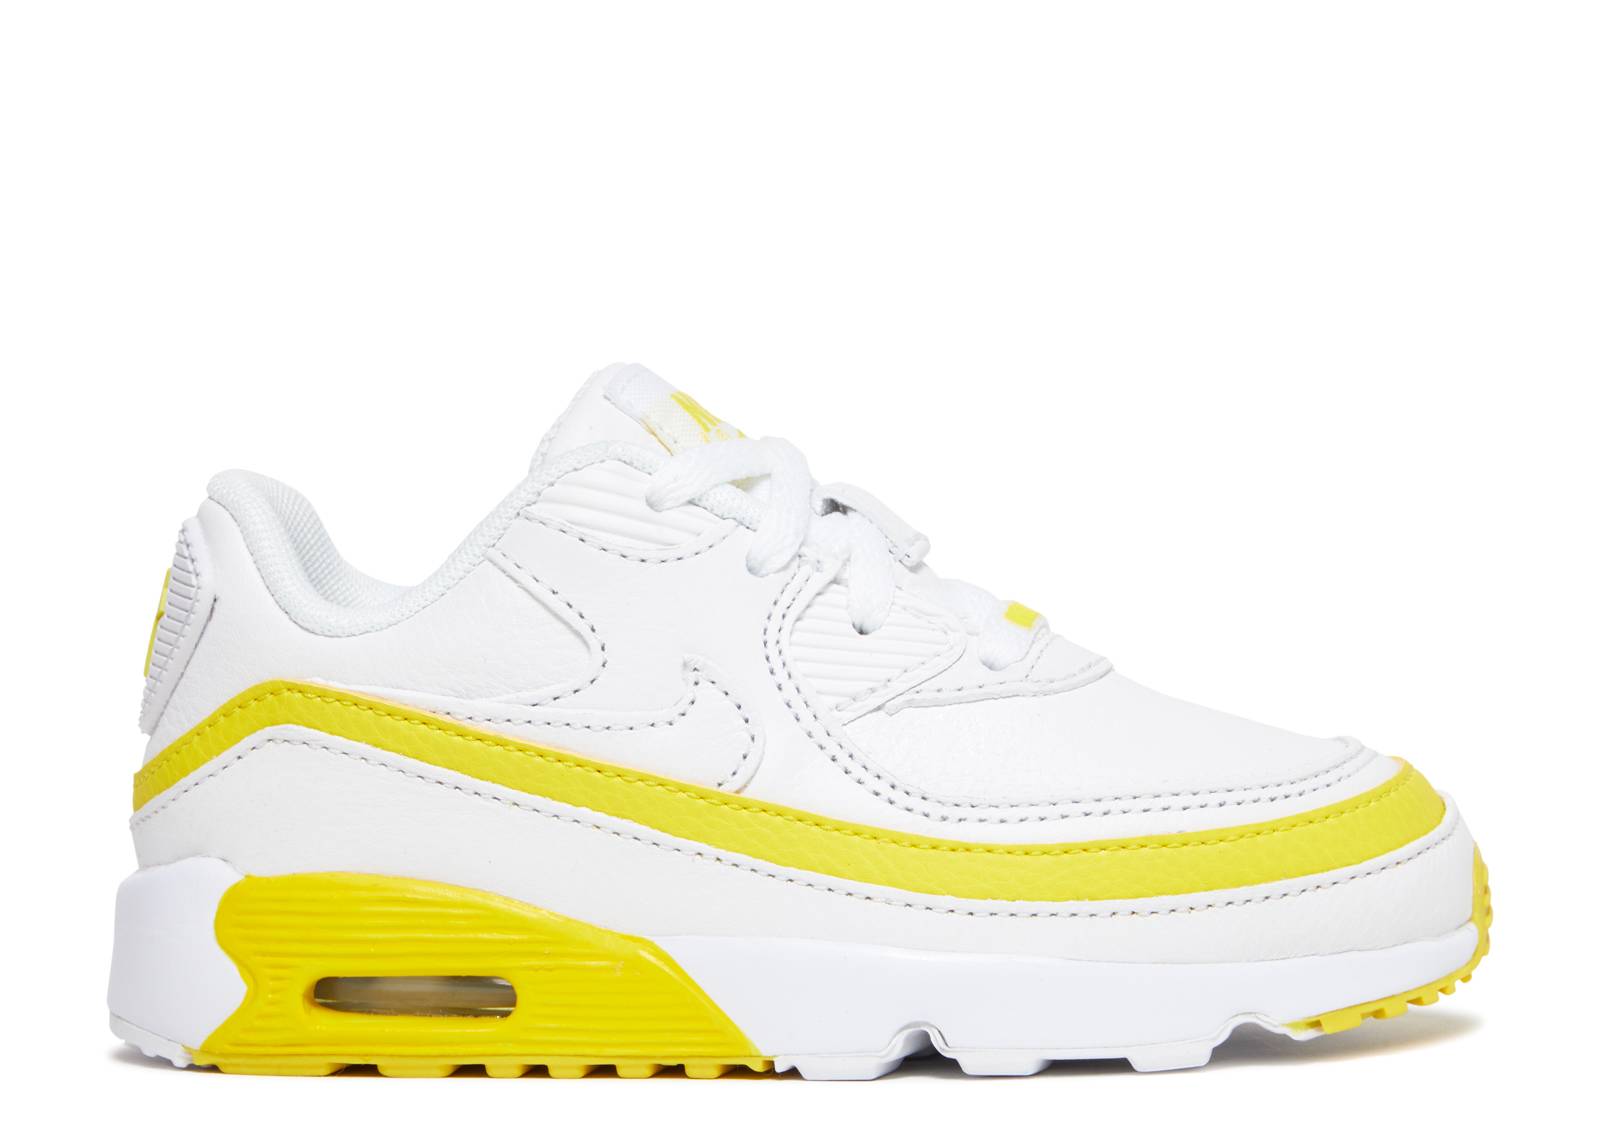 Undefeated x Air Max 90 BT 'White Optic Yellow'